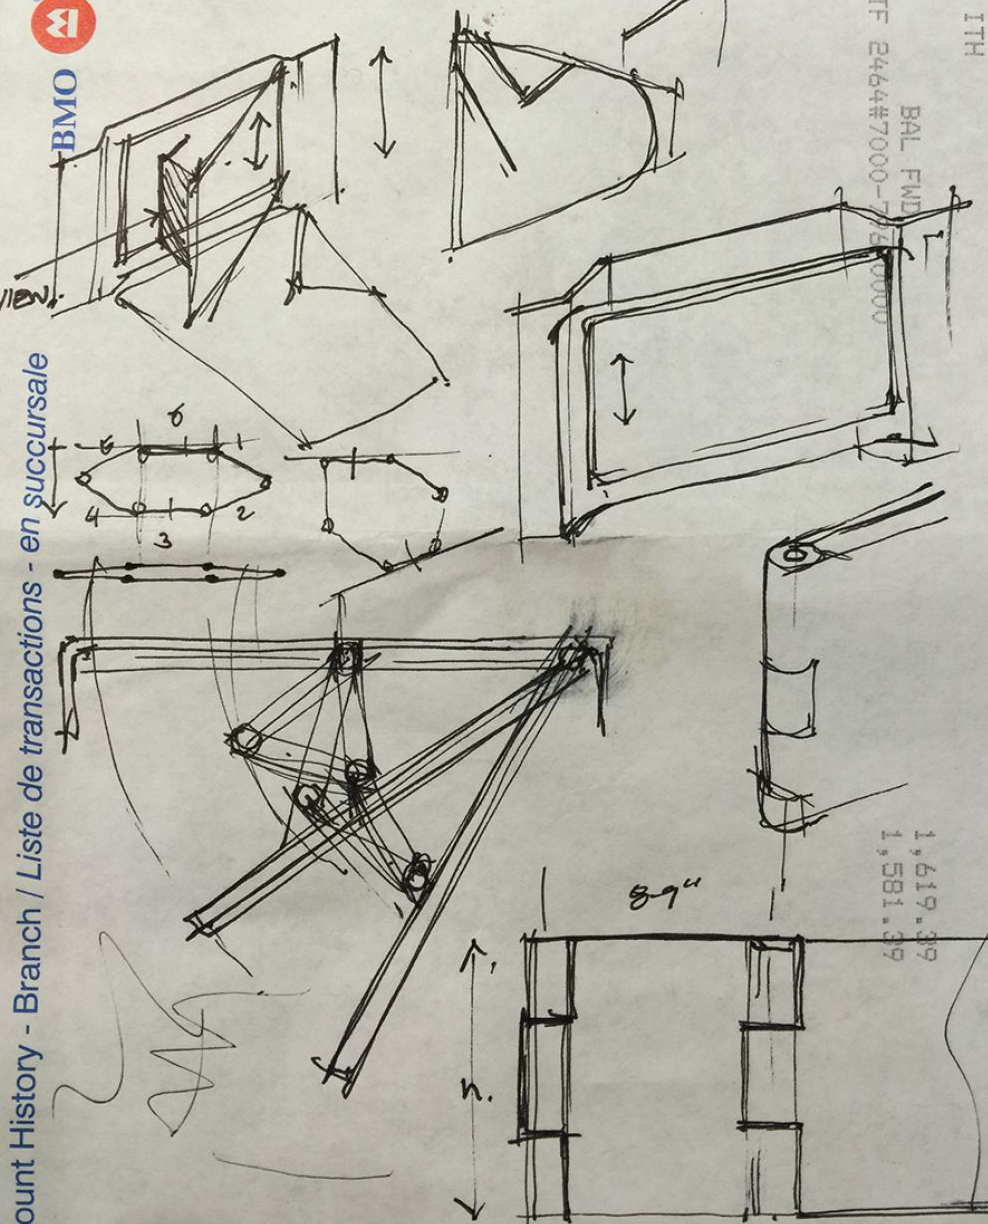  Understanding the required geometry to articulate a large monitor. 